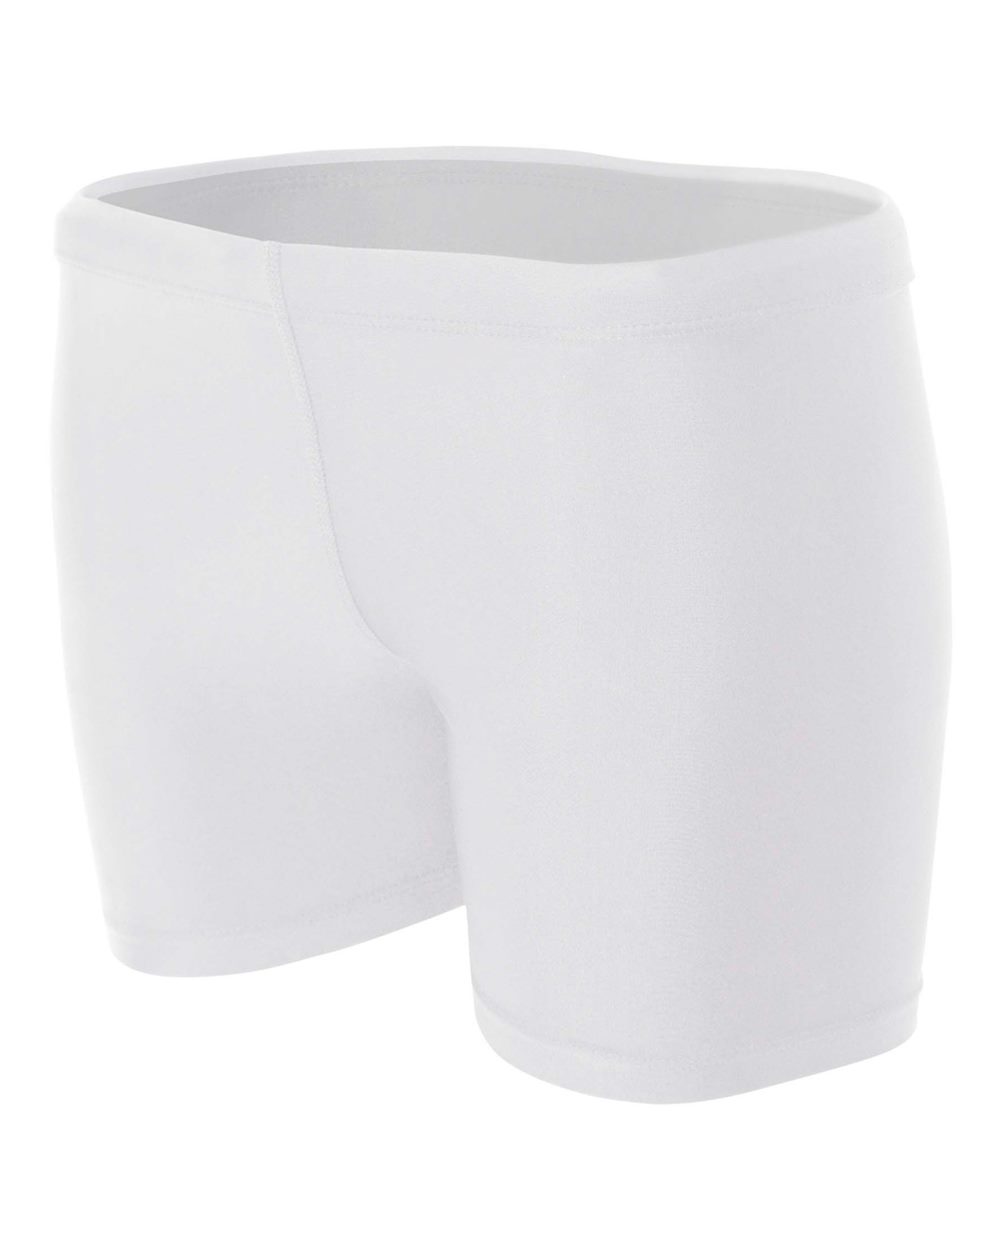 A4 Women&amp;apos;s 4 Inch Compression Short (White)